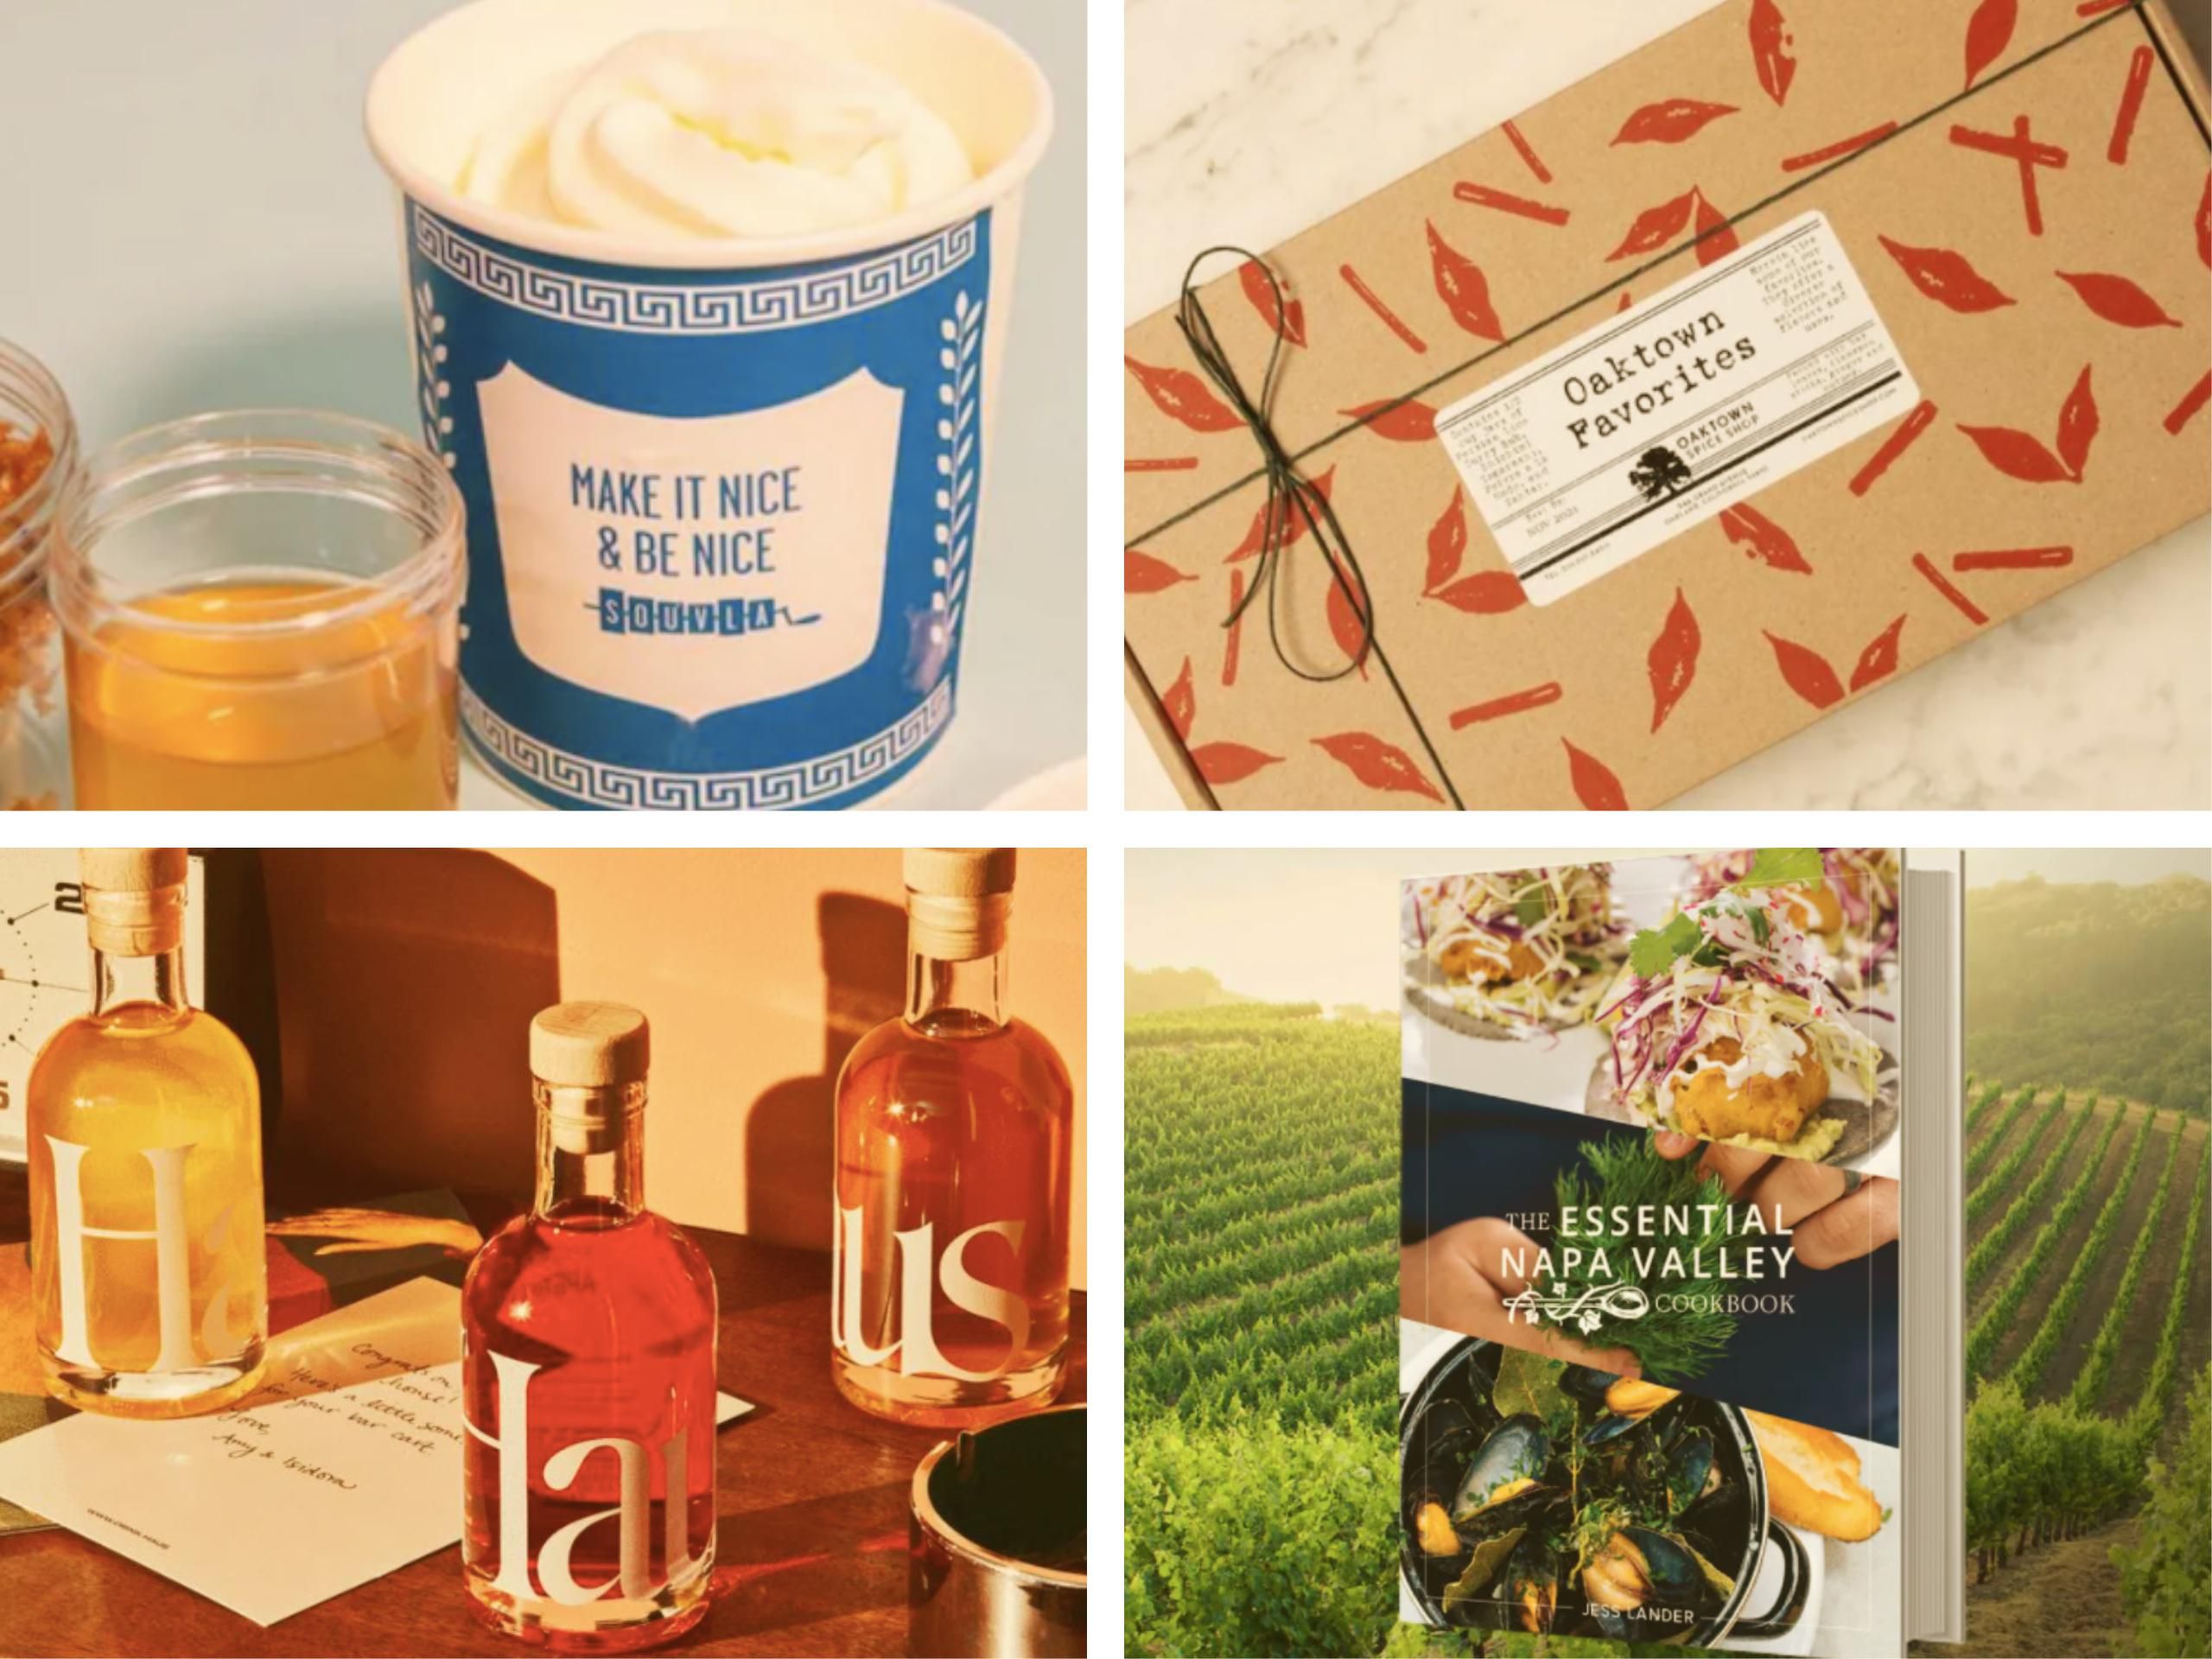 10 Tasty Holiday Gifts for Bay Area Foodies